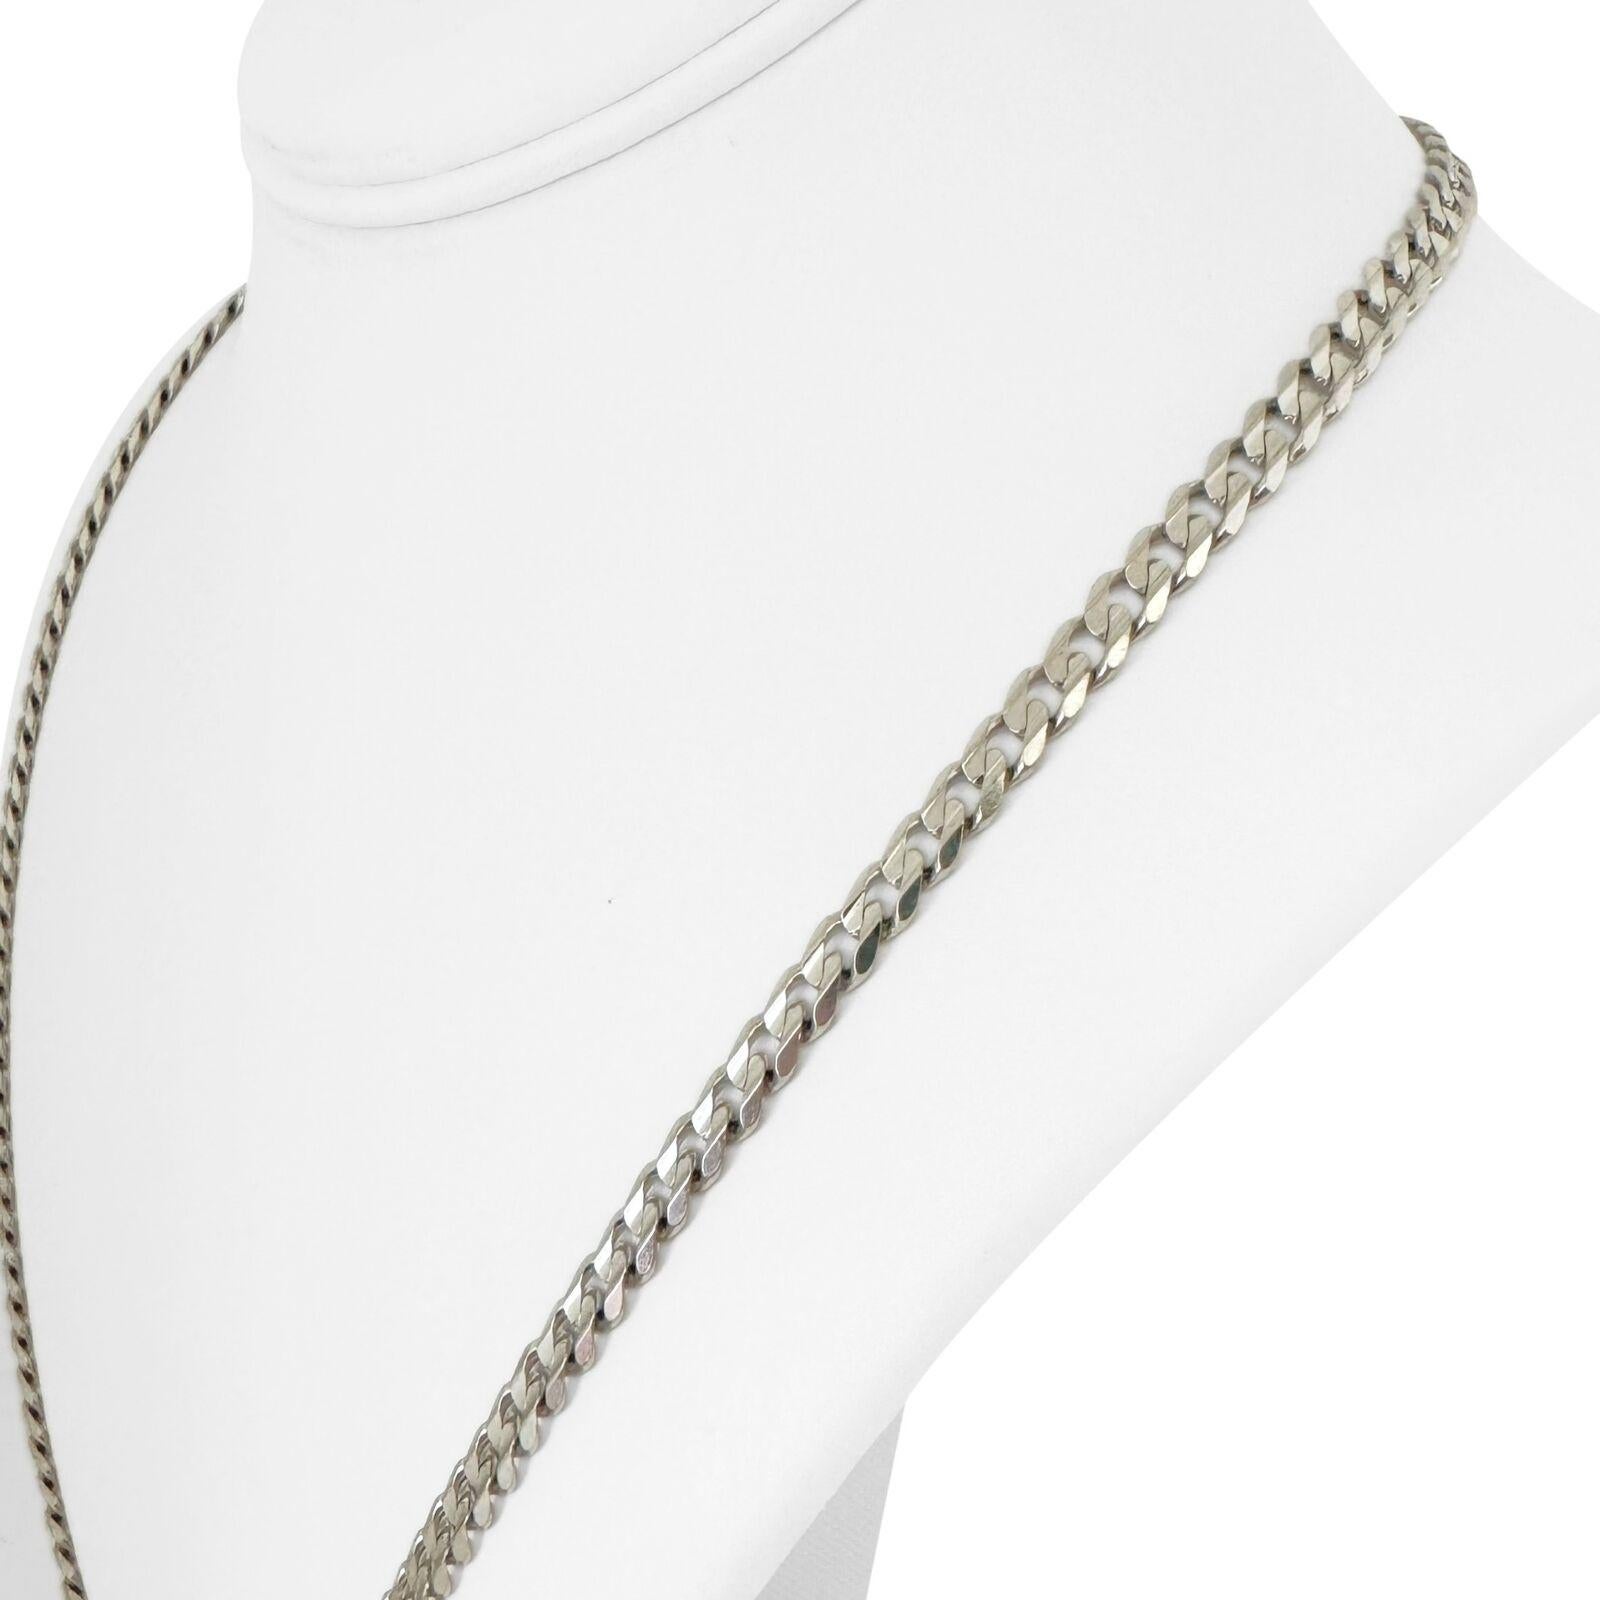 14k White Gold 26.8g Solid 5mm Curb Link Chain Necklace Italy 24